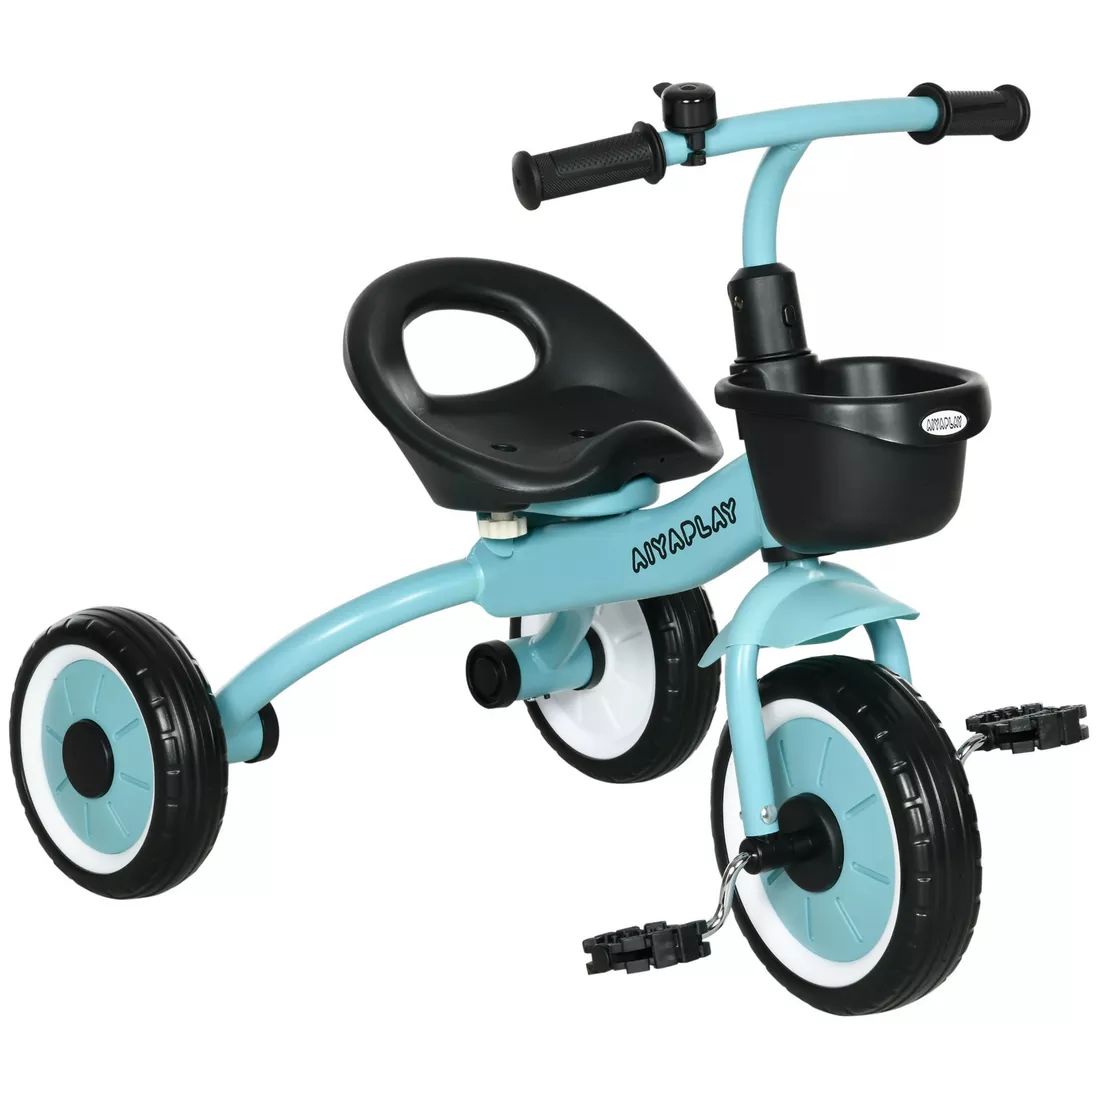 Kids Trike, Tricycle with Adjustable Seat Basket, for Ages 2-5 Years | Debenhams UK